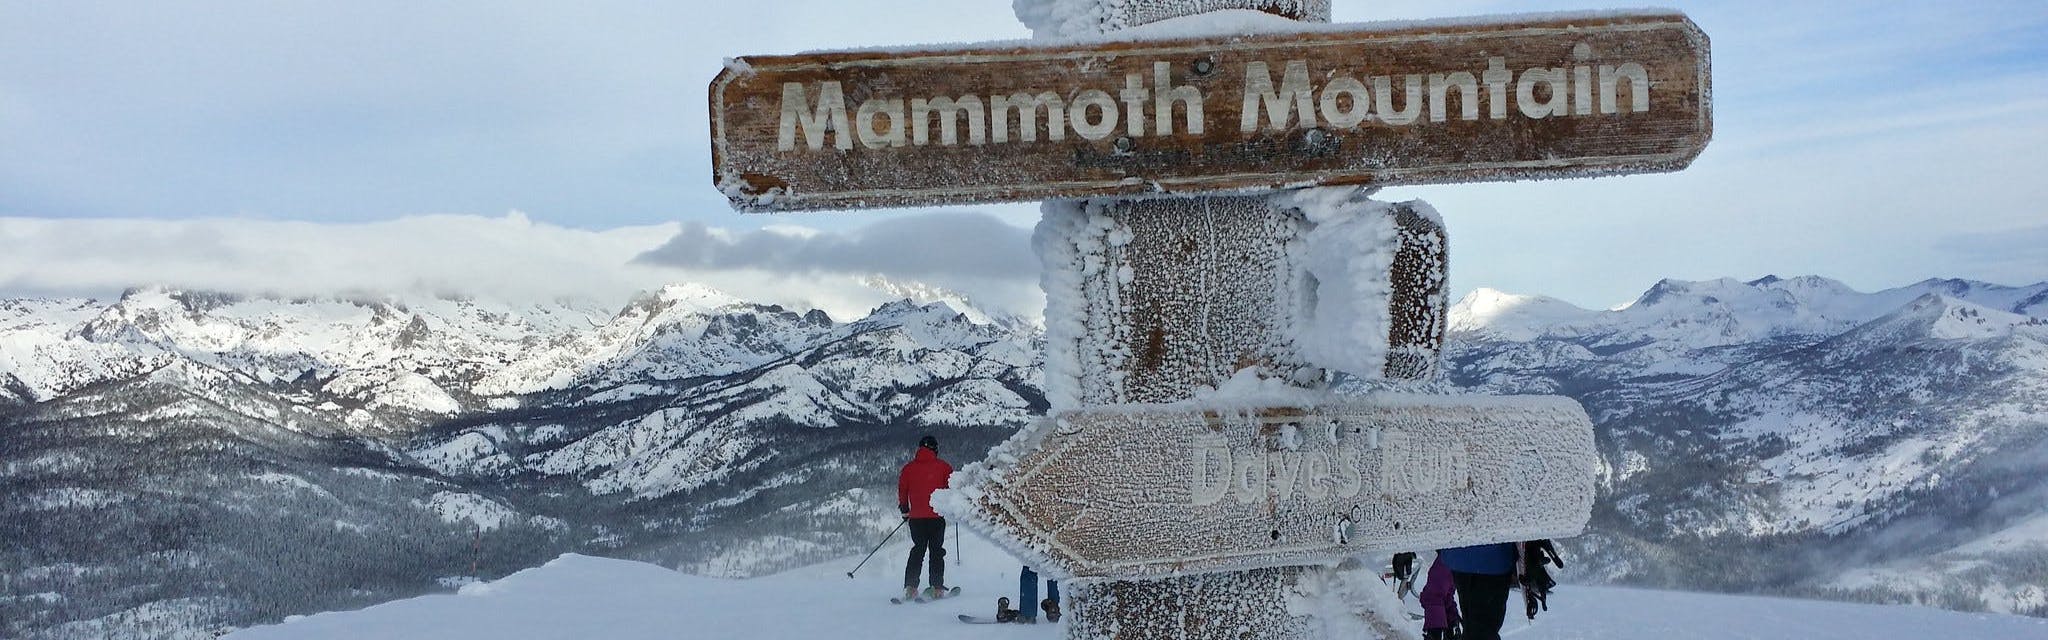 A snowy sign that says "Mammoth Mountain". There is a skier heading down the slopes in the background and several snowy mountains. 